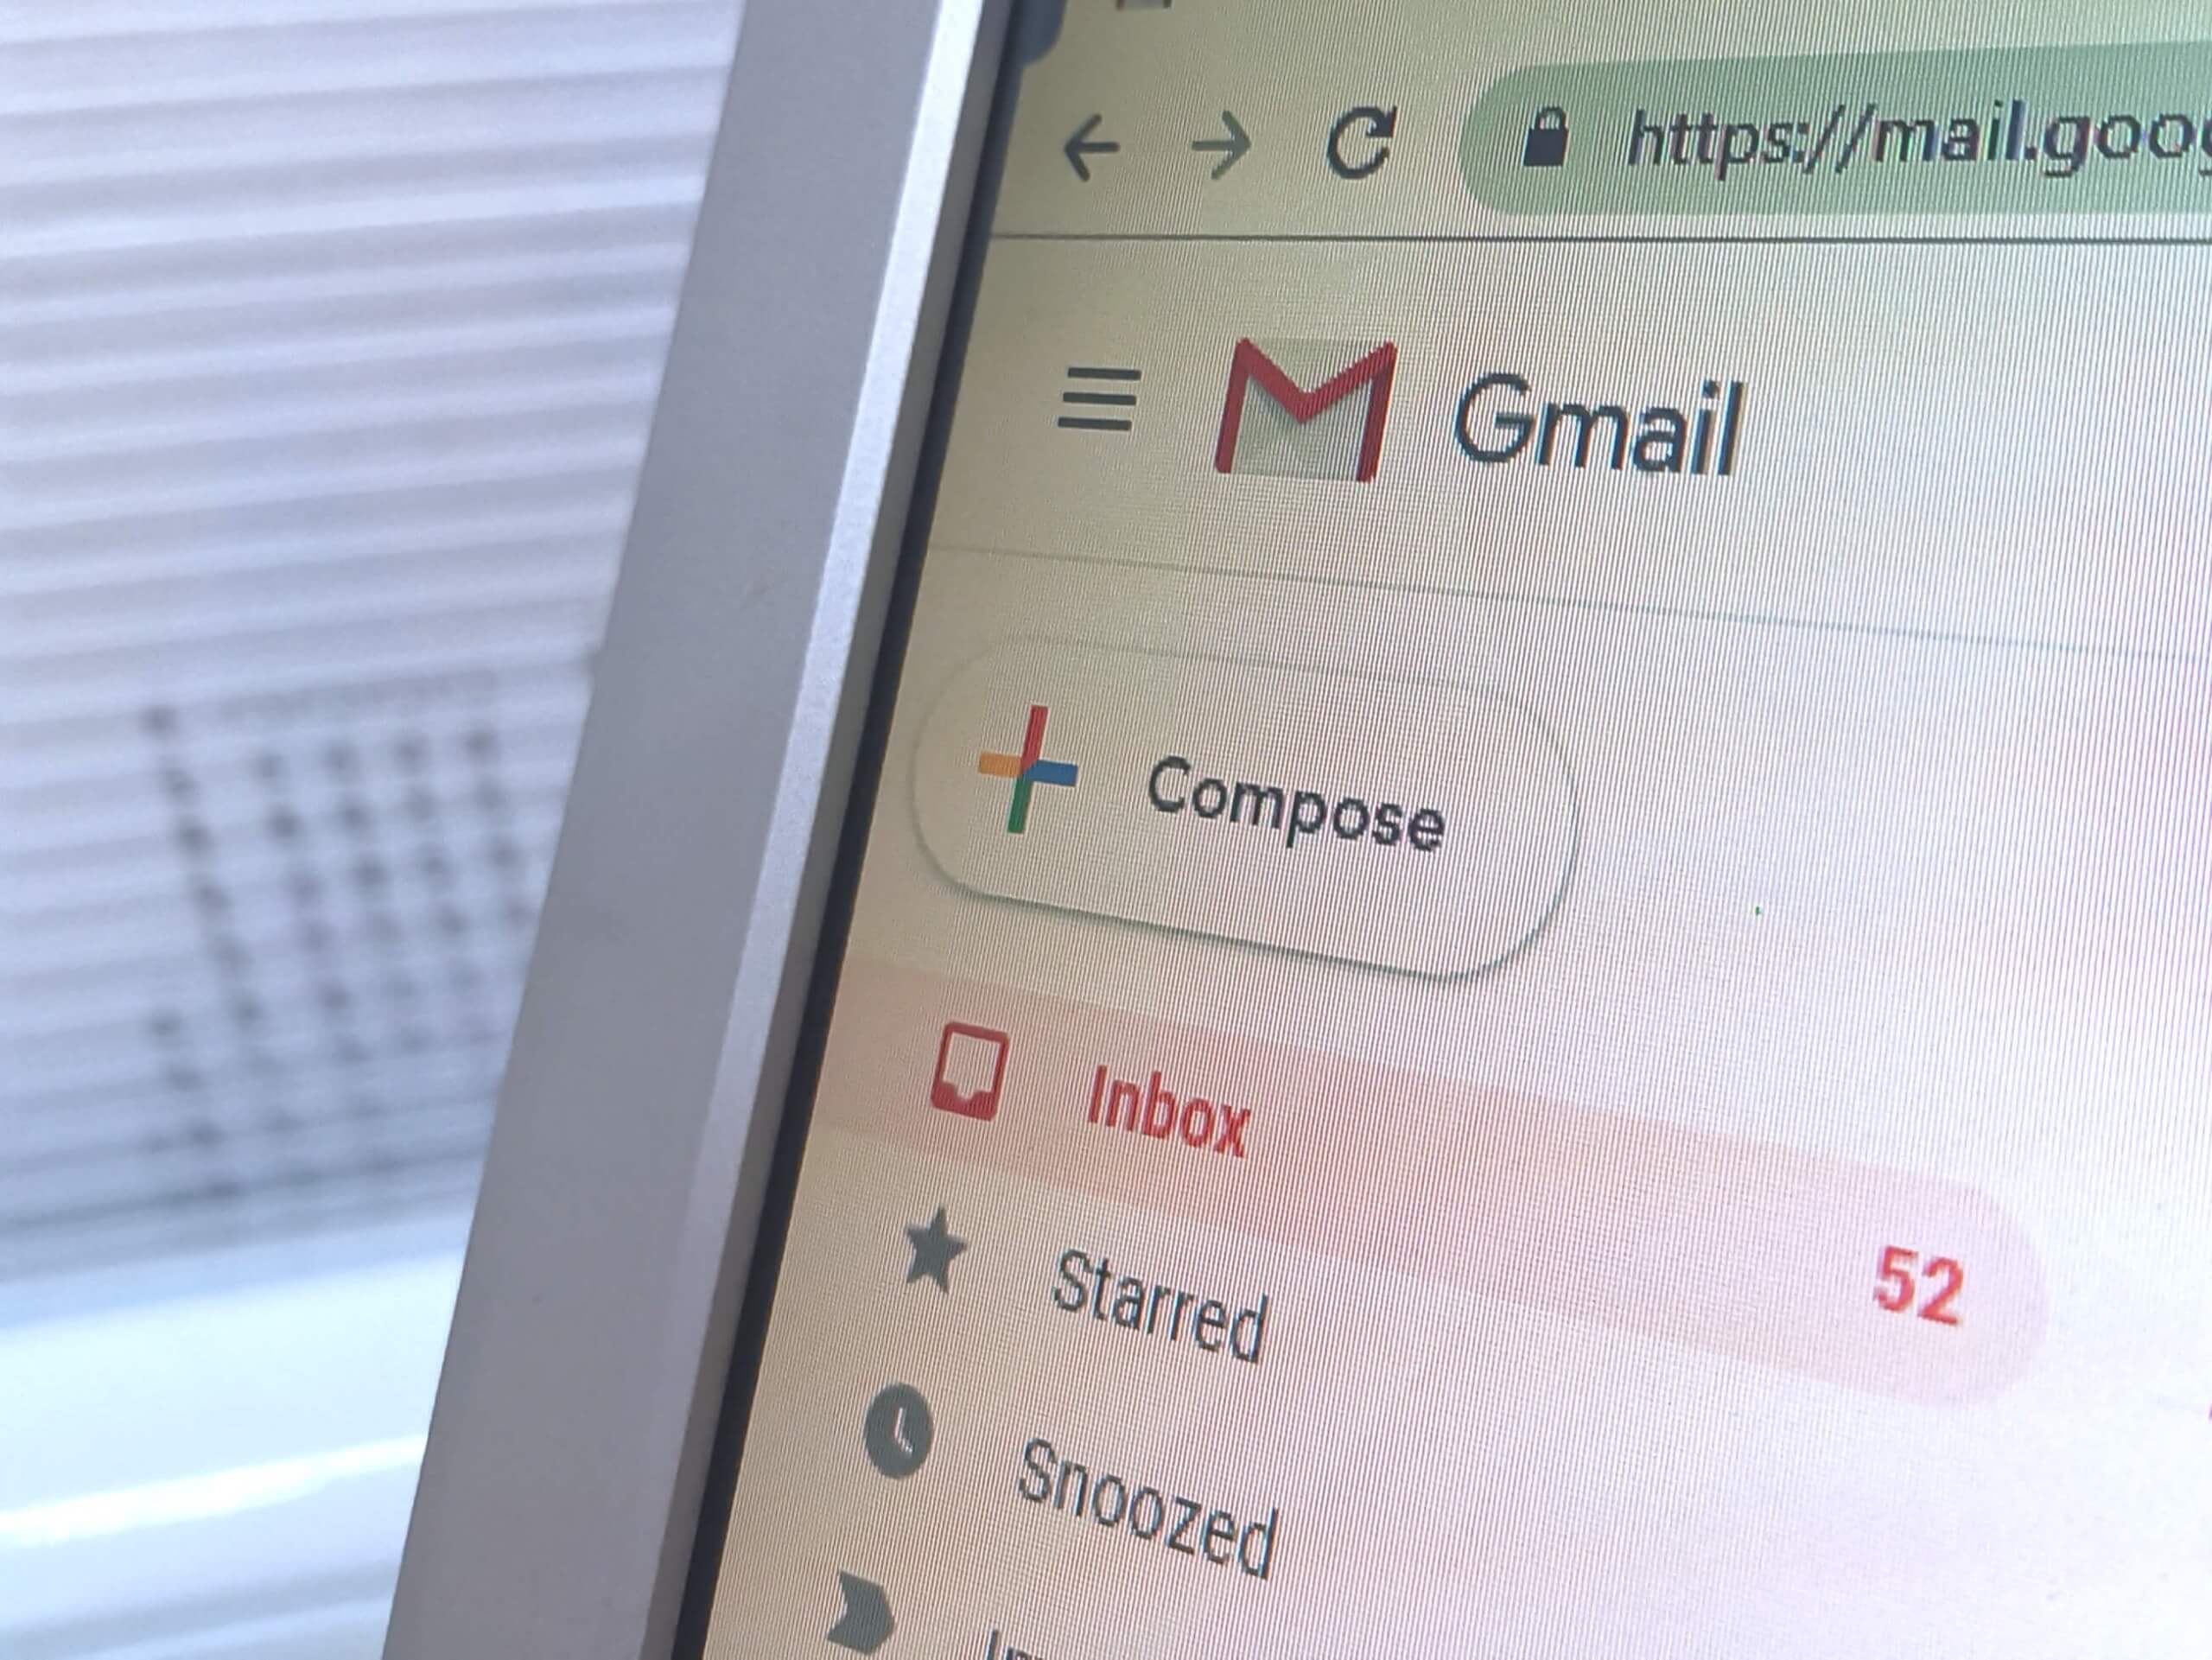 You can hide Google Meet from the Gmail sidebar, here's how